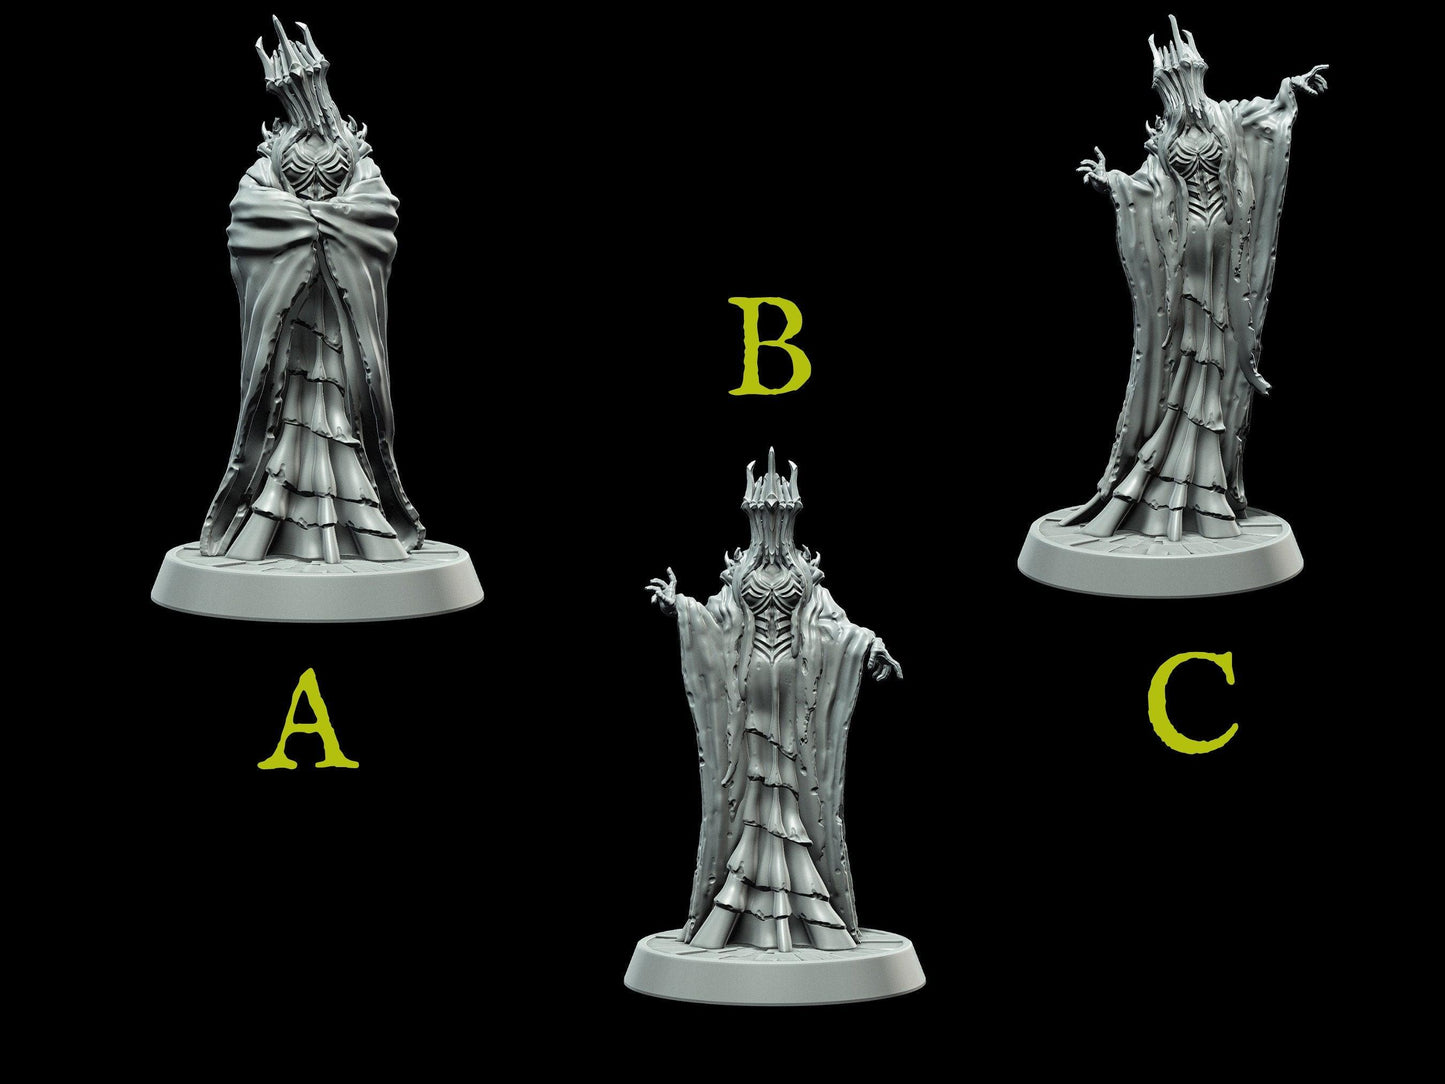 Mad Queen Miniature | 3 Poses | 28mm scale Tabletop gaming DnD Miniature Dungeons and Dragons,dnd monster manual dnd 5e - Plague Miniatures shop for DnD Miniatures